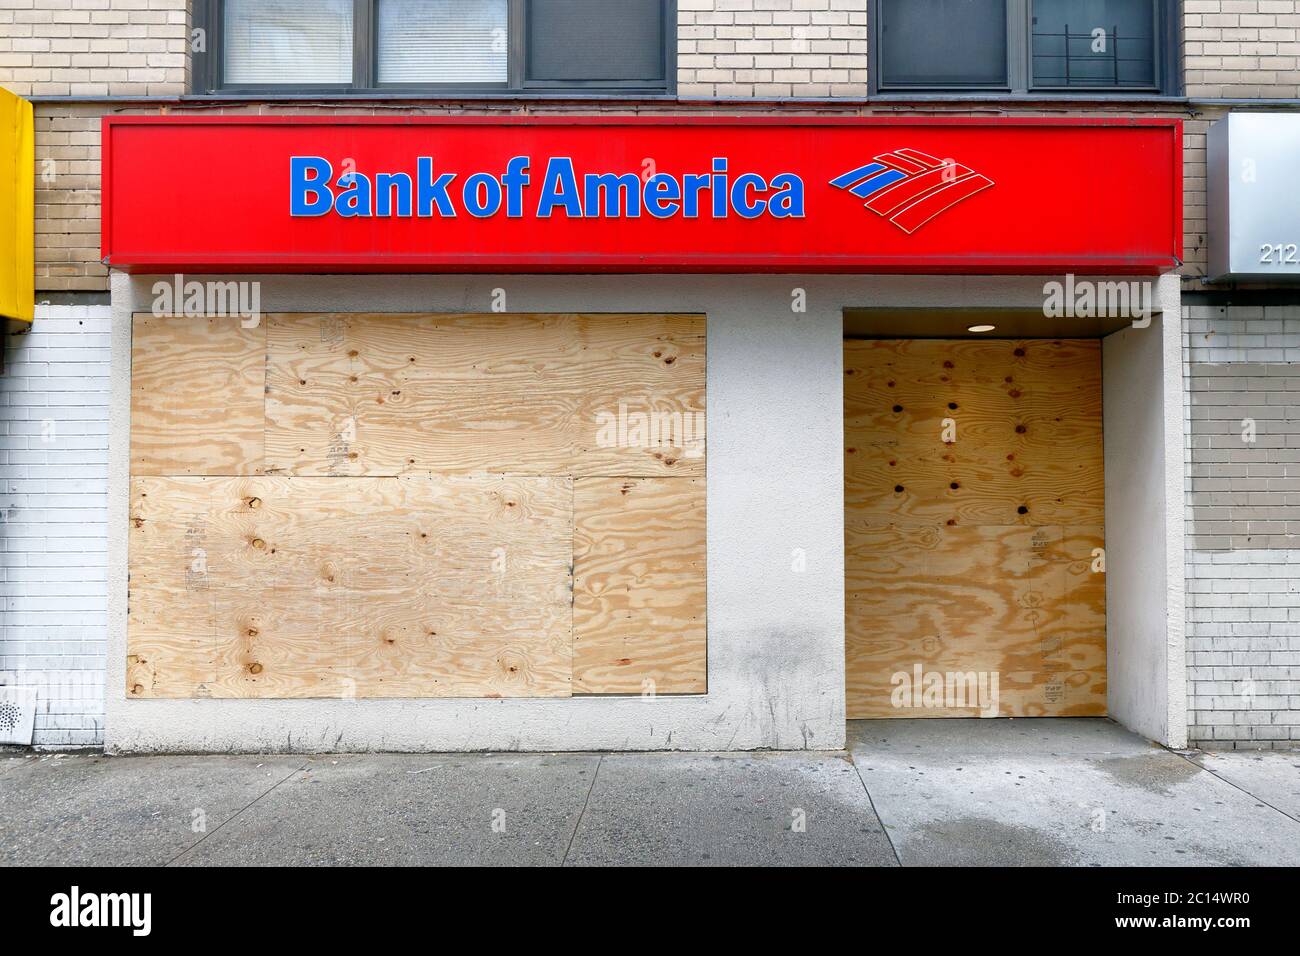 A shuttered, boarded up, closed Bank of America storefront bank branch in New York Stock Photo